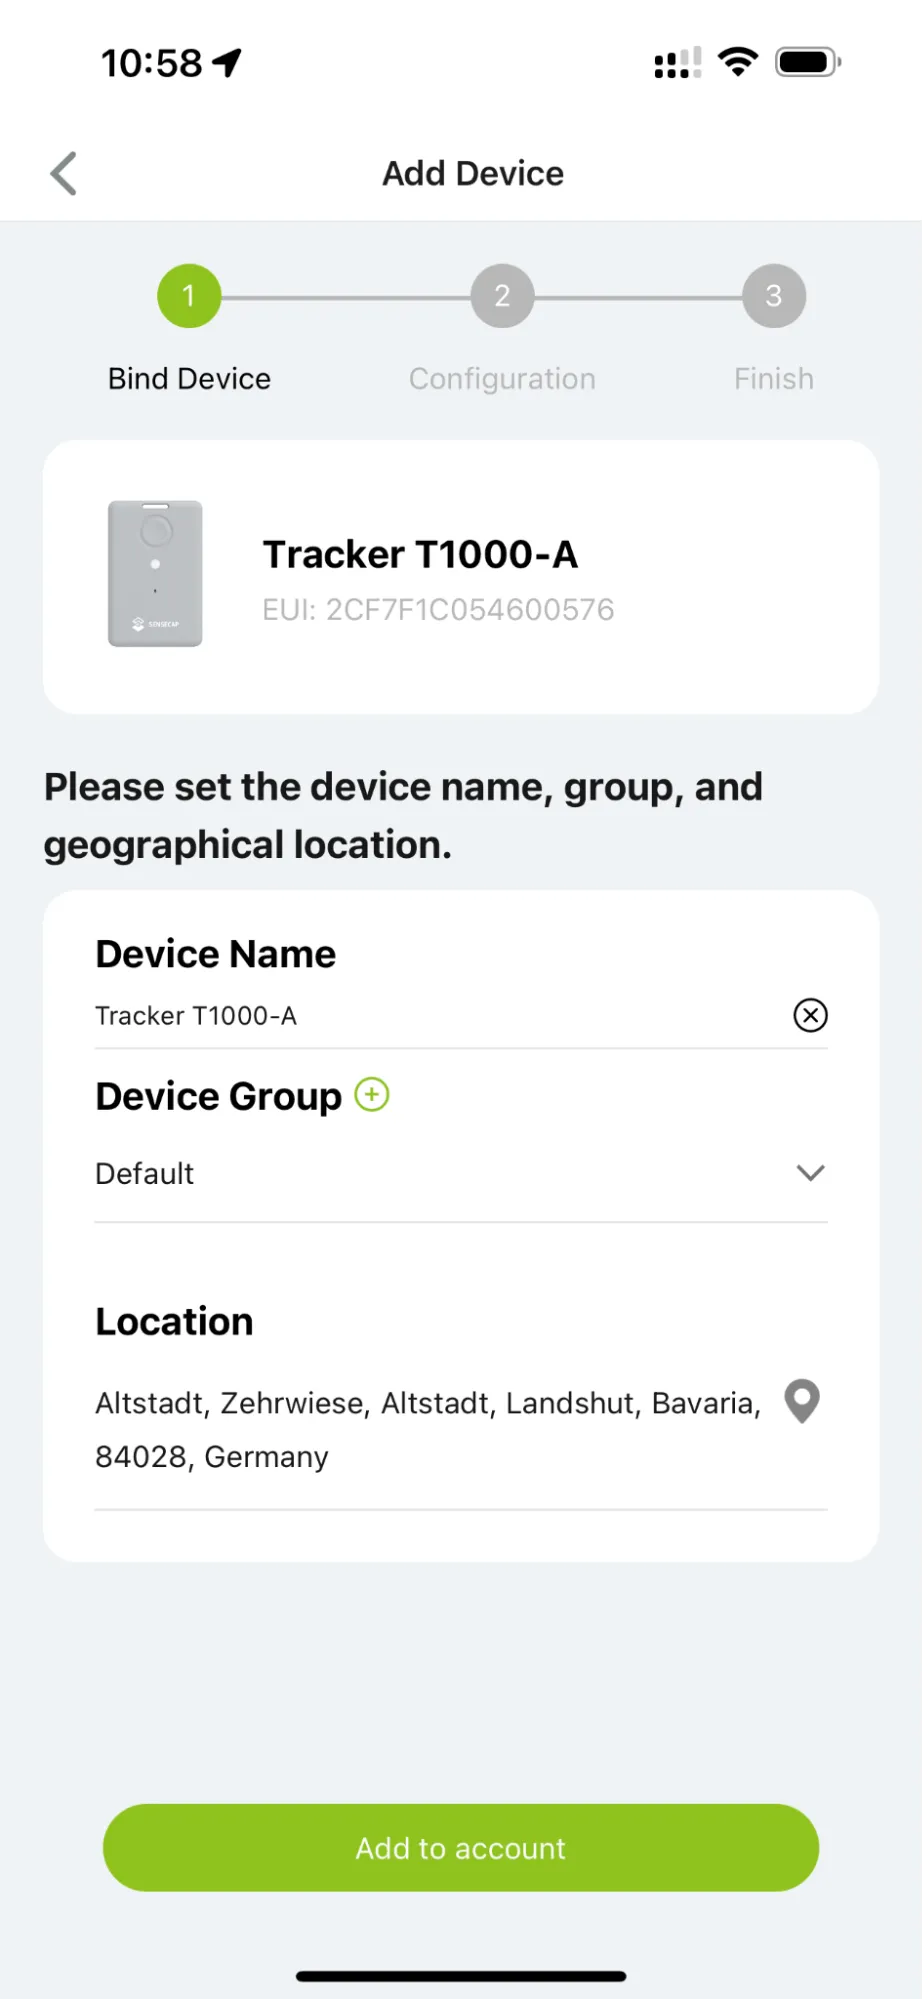 Define a name and assign a group and the location of the tracker